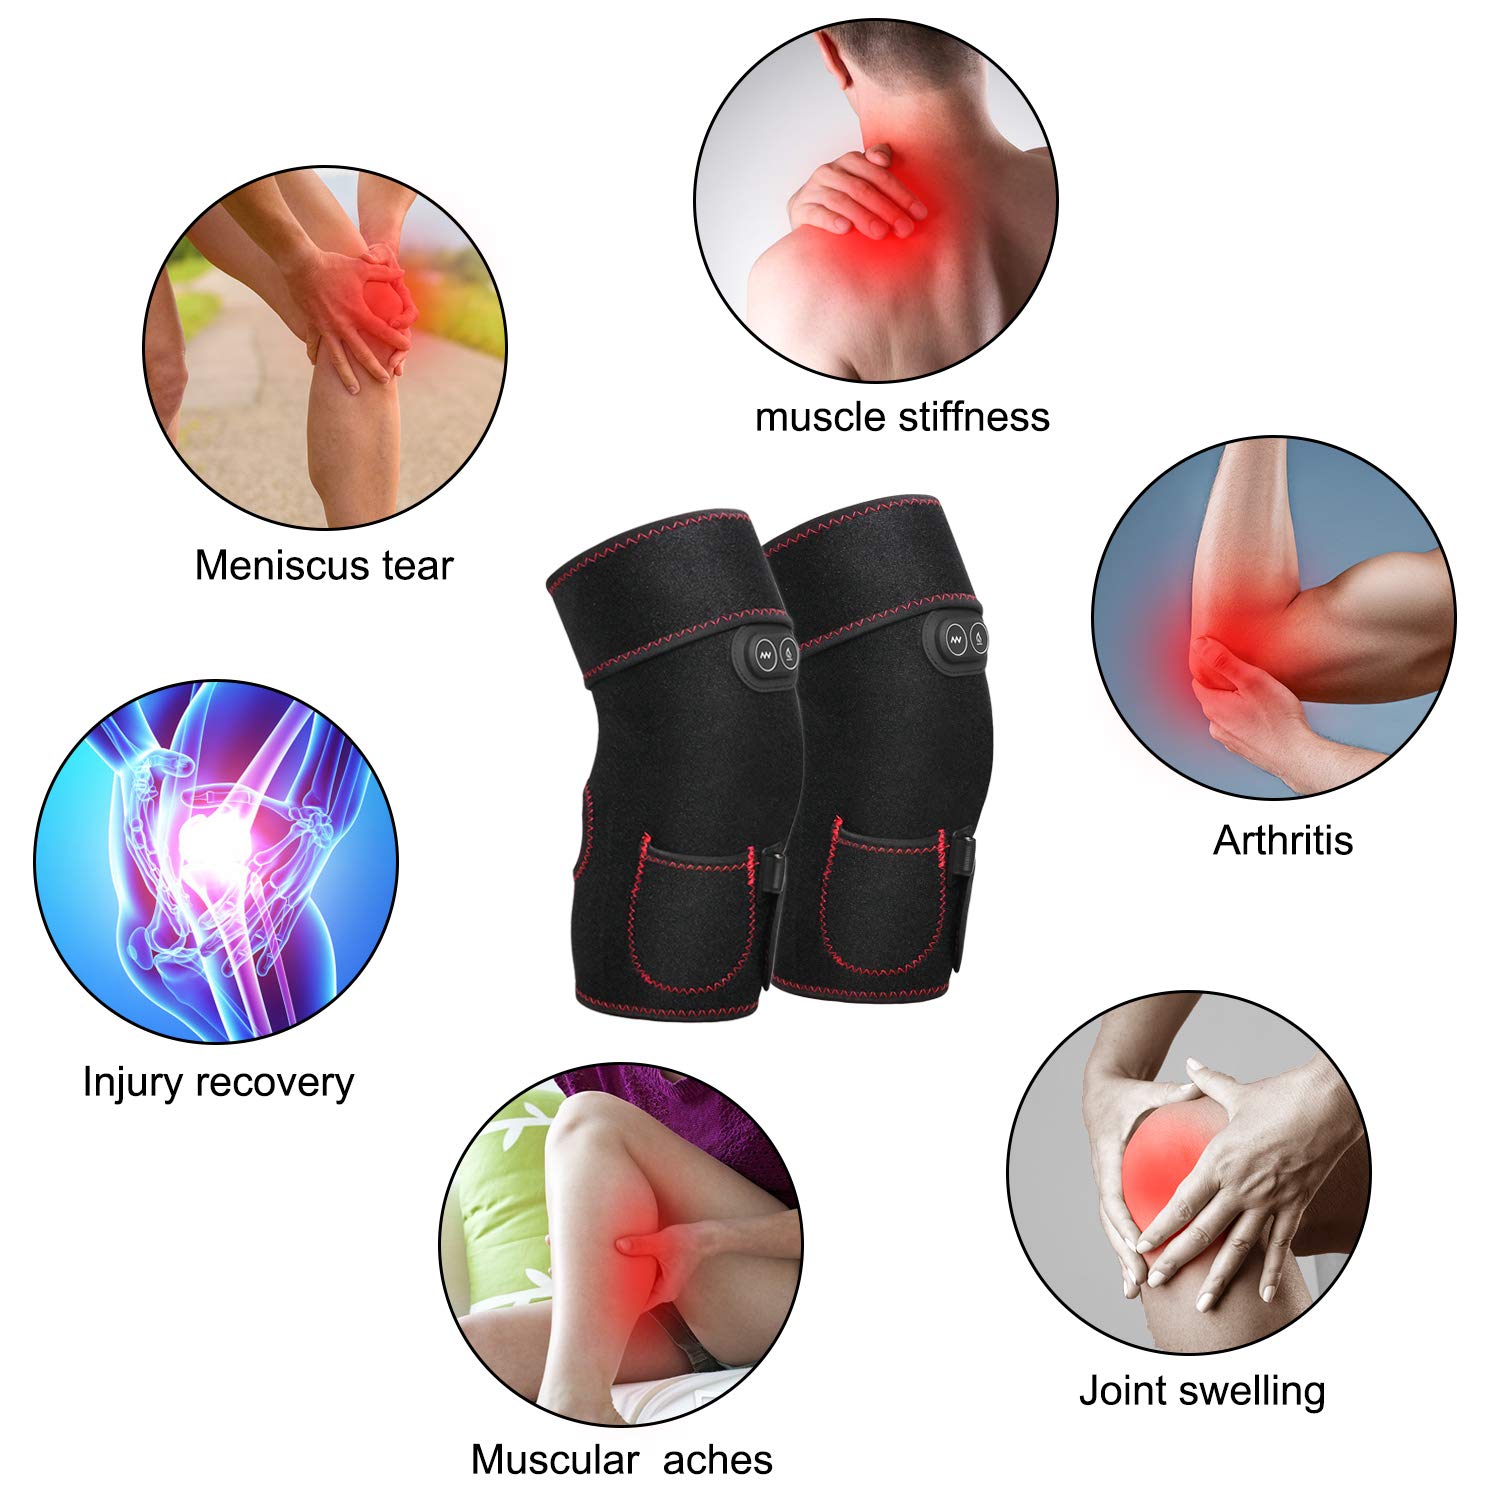 Heated Knee Brace Wrap, 3 Adjustable Heat and Vibration Knee Massager for Arthritis Knee Pain Relief Massaging Knee Pad with AC Adapter (No Battery)